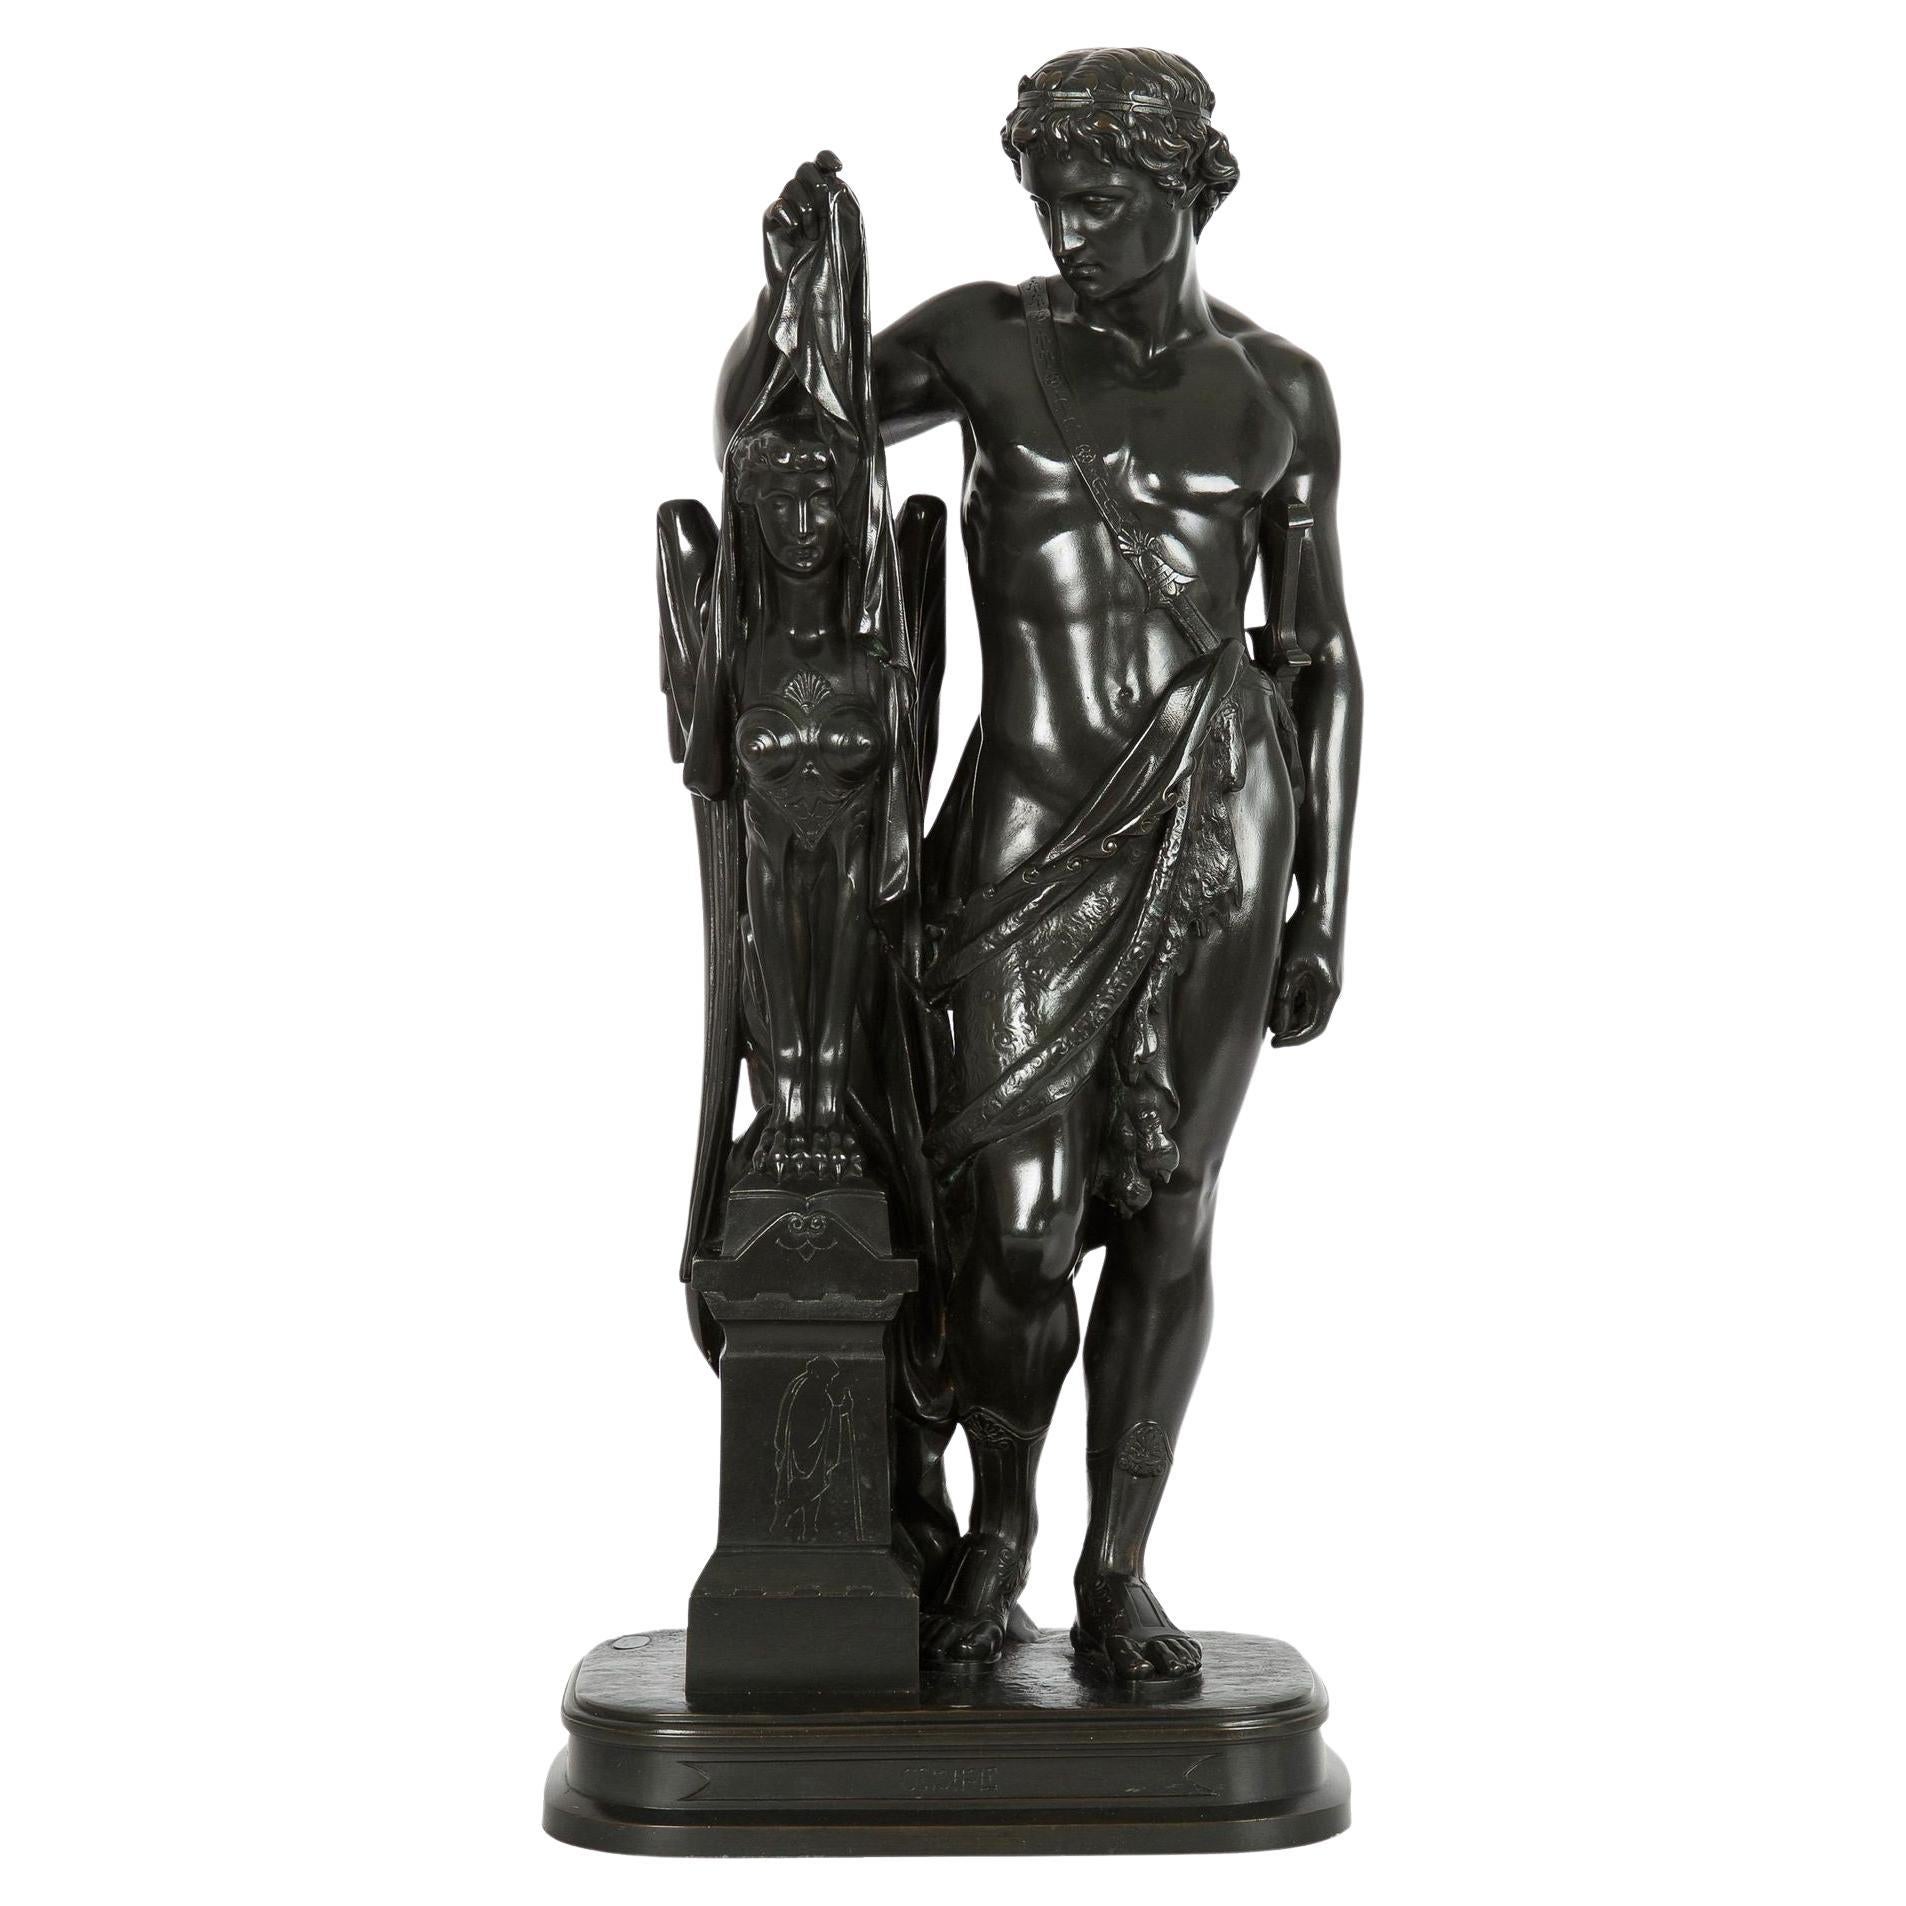 French Antique Bronze Sculpture “Oedipus and Sphinx” by Pierre Emile Hebert